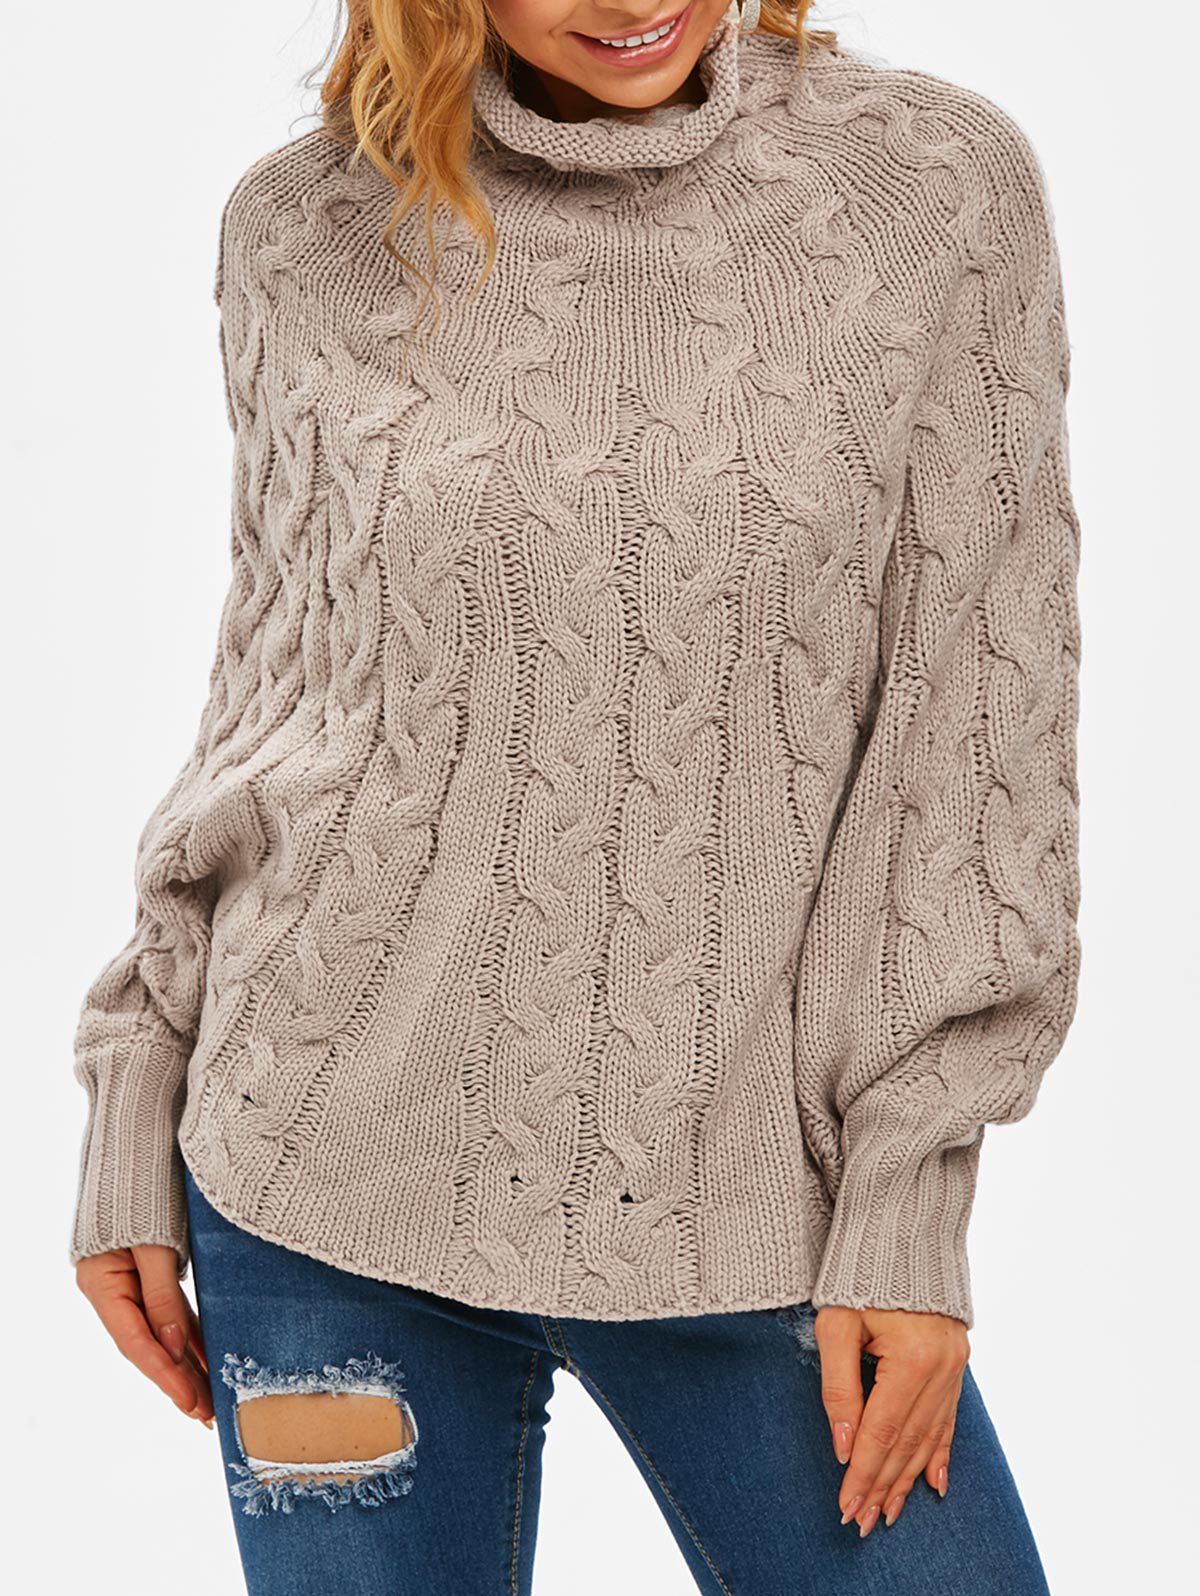 Cable Knit High Neck Poncho Sweater - LIGHT COFFEE L